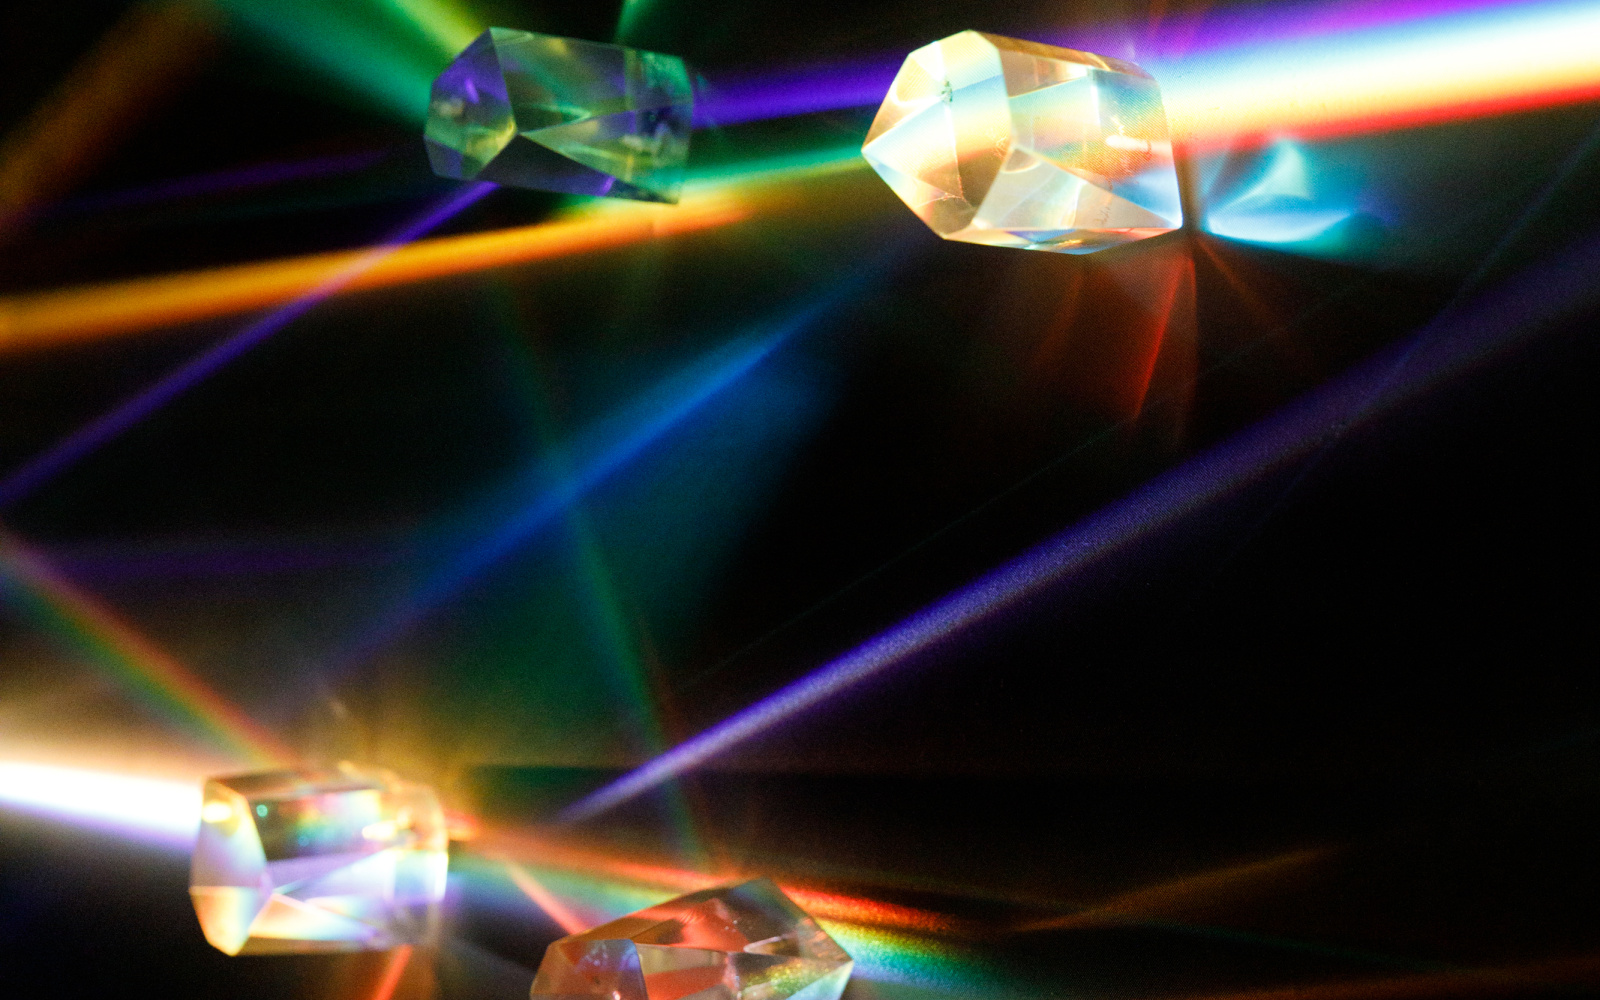 Prisms scatter light into small rainbows